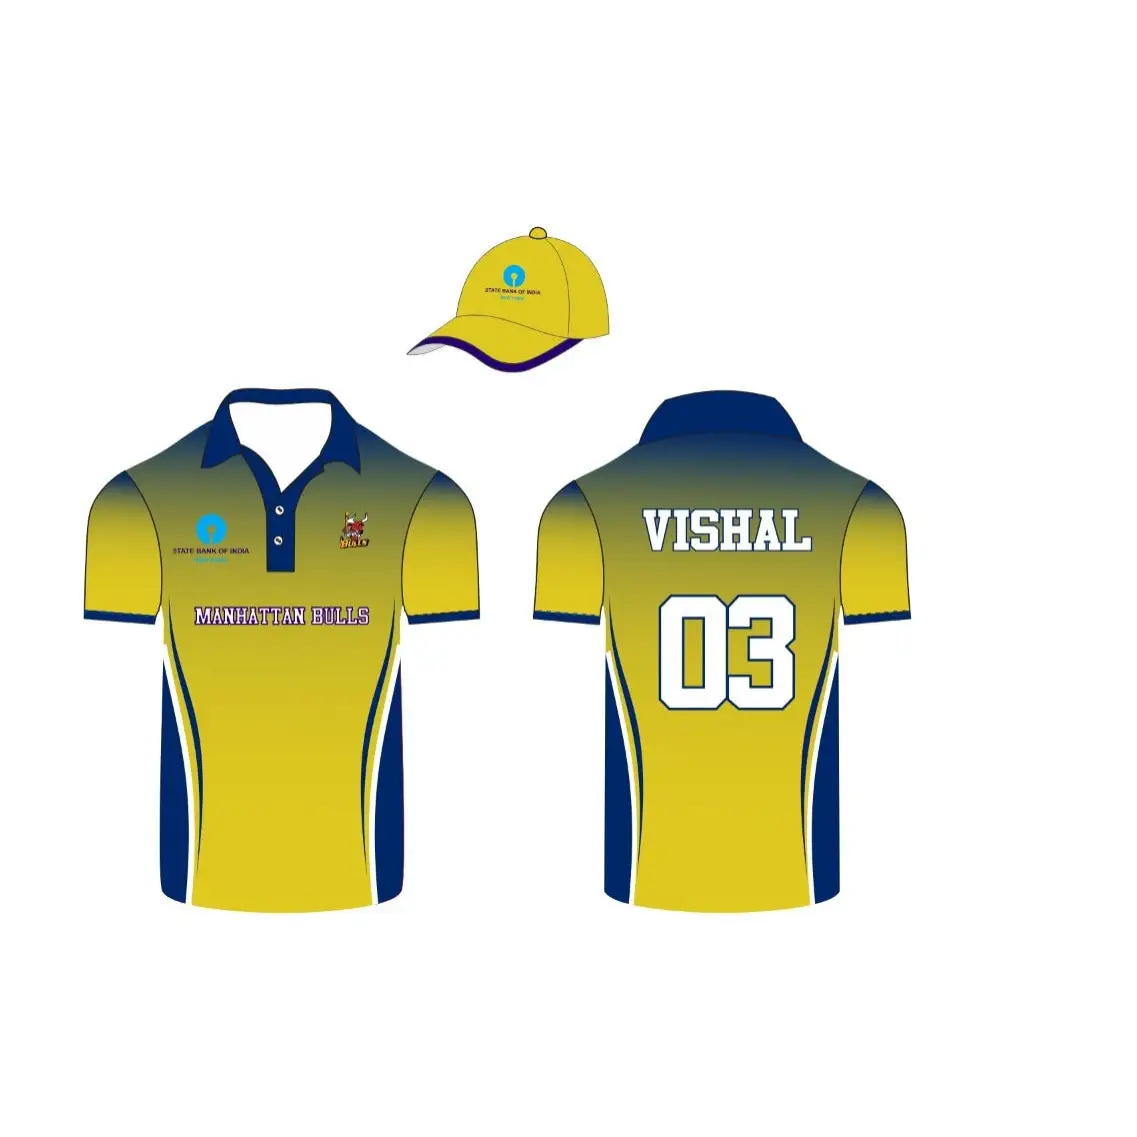 Cricket Shirt And Cap With Player Name And Number & Team Name - Yellow And Blue - Custom Cricket Jerseys